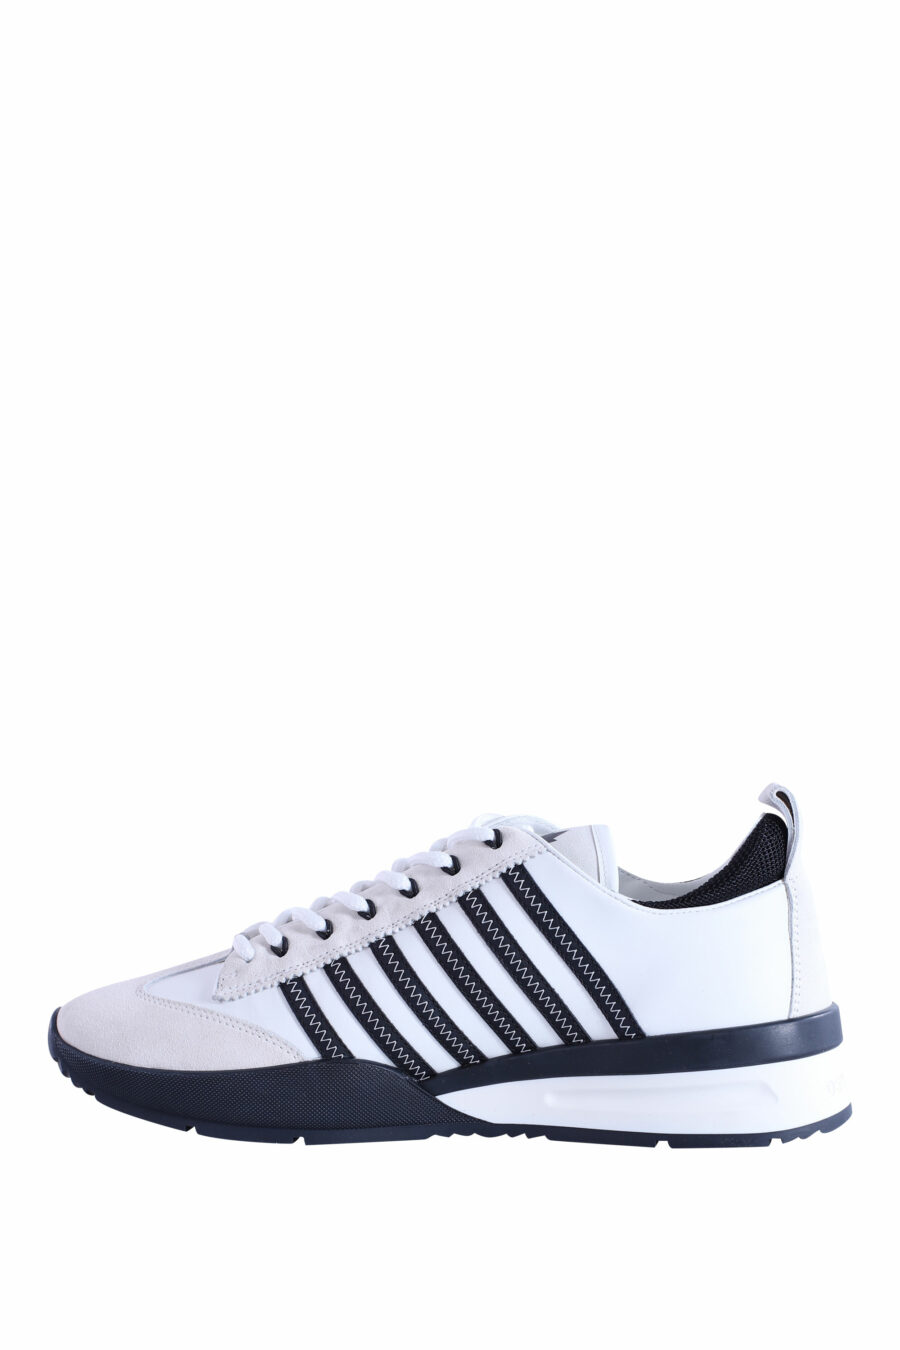 Black and white trainers with blue lines - IMG 2964